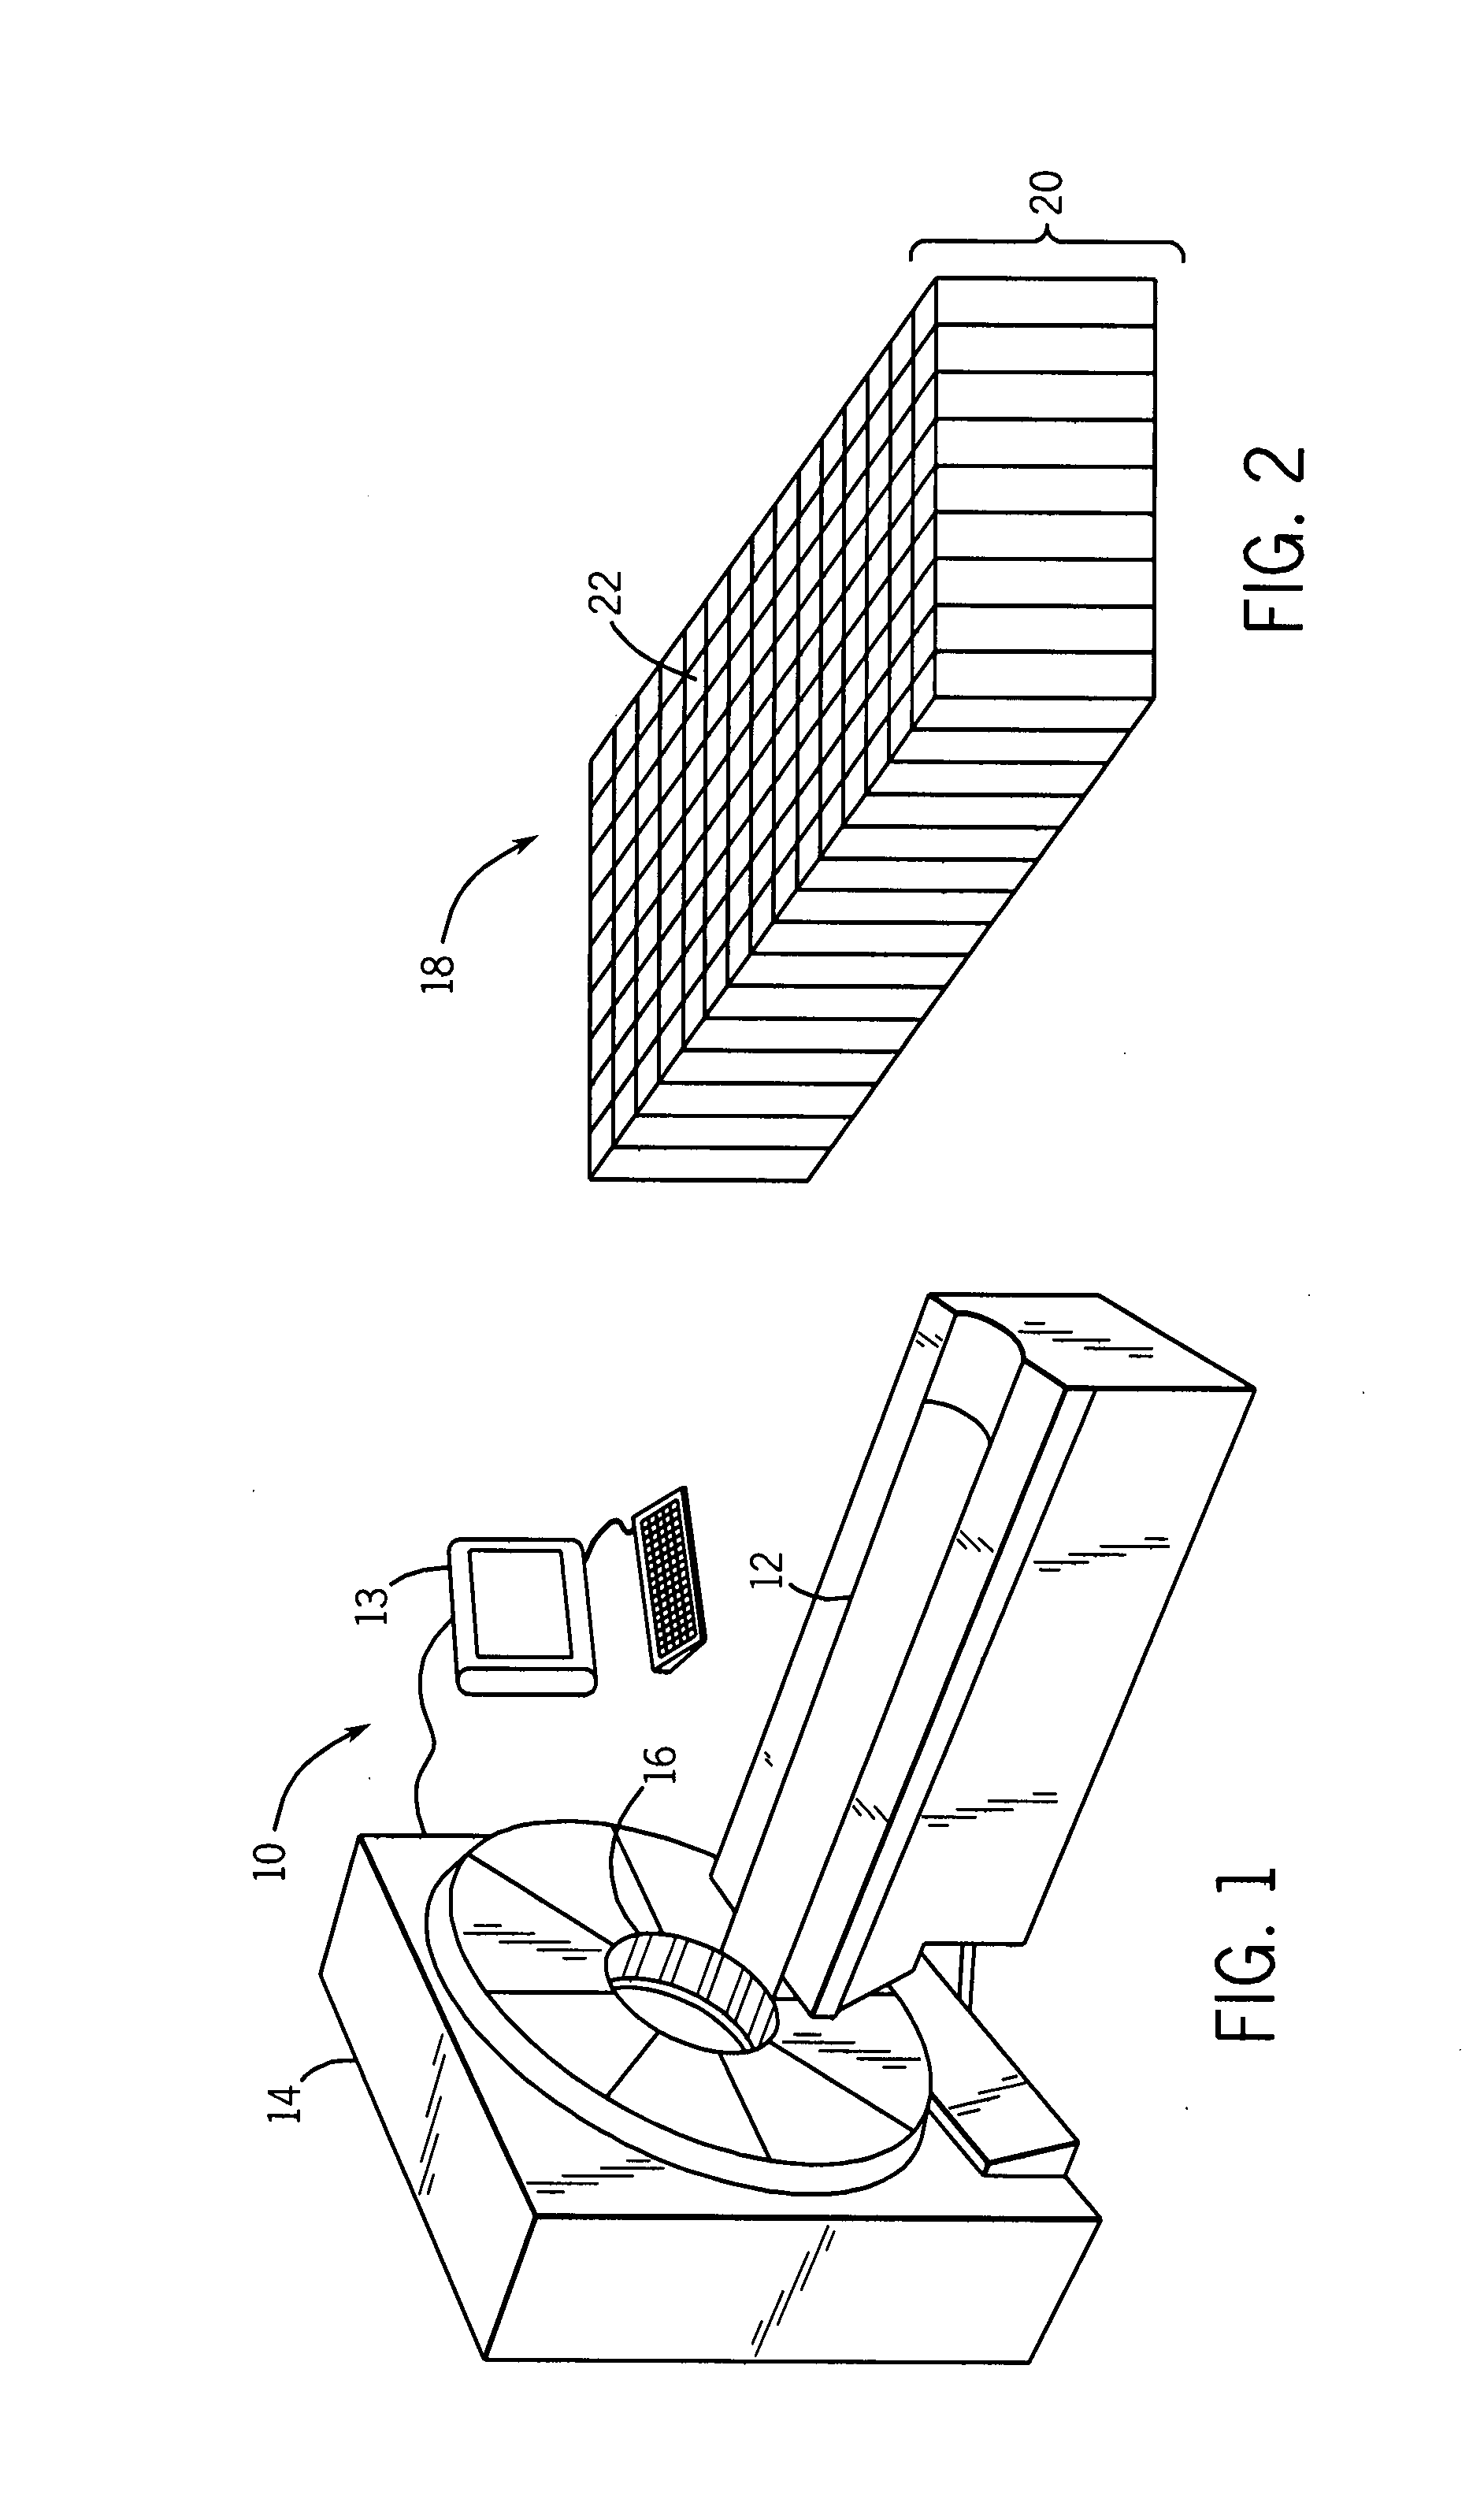 Nano-scale metal oxyhalide and oxysulfide scintillation materials and methods for making same